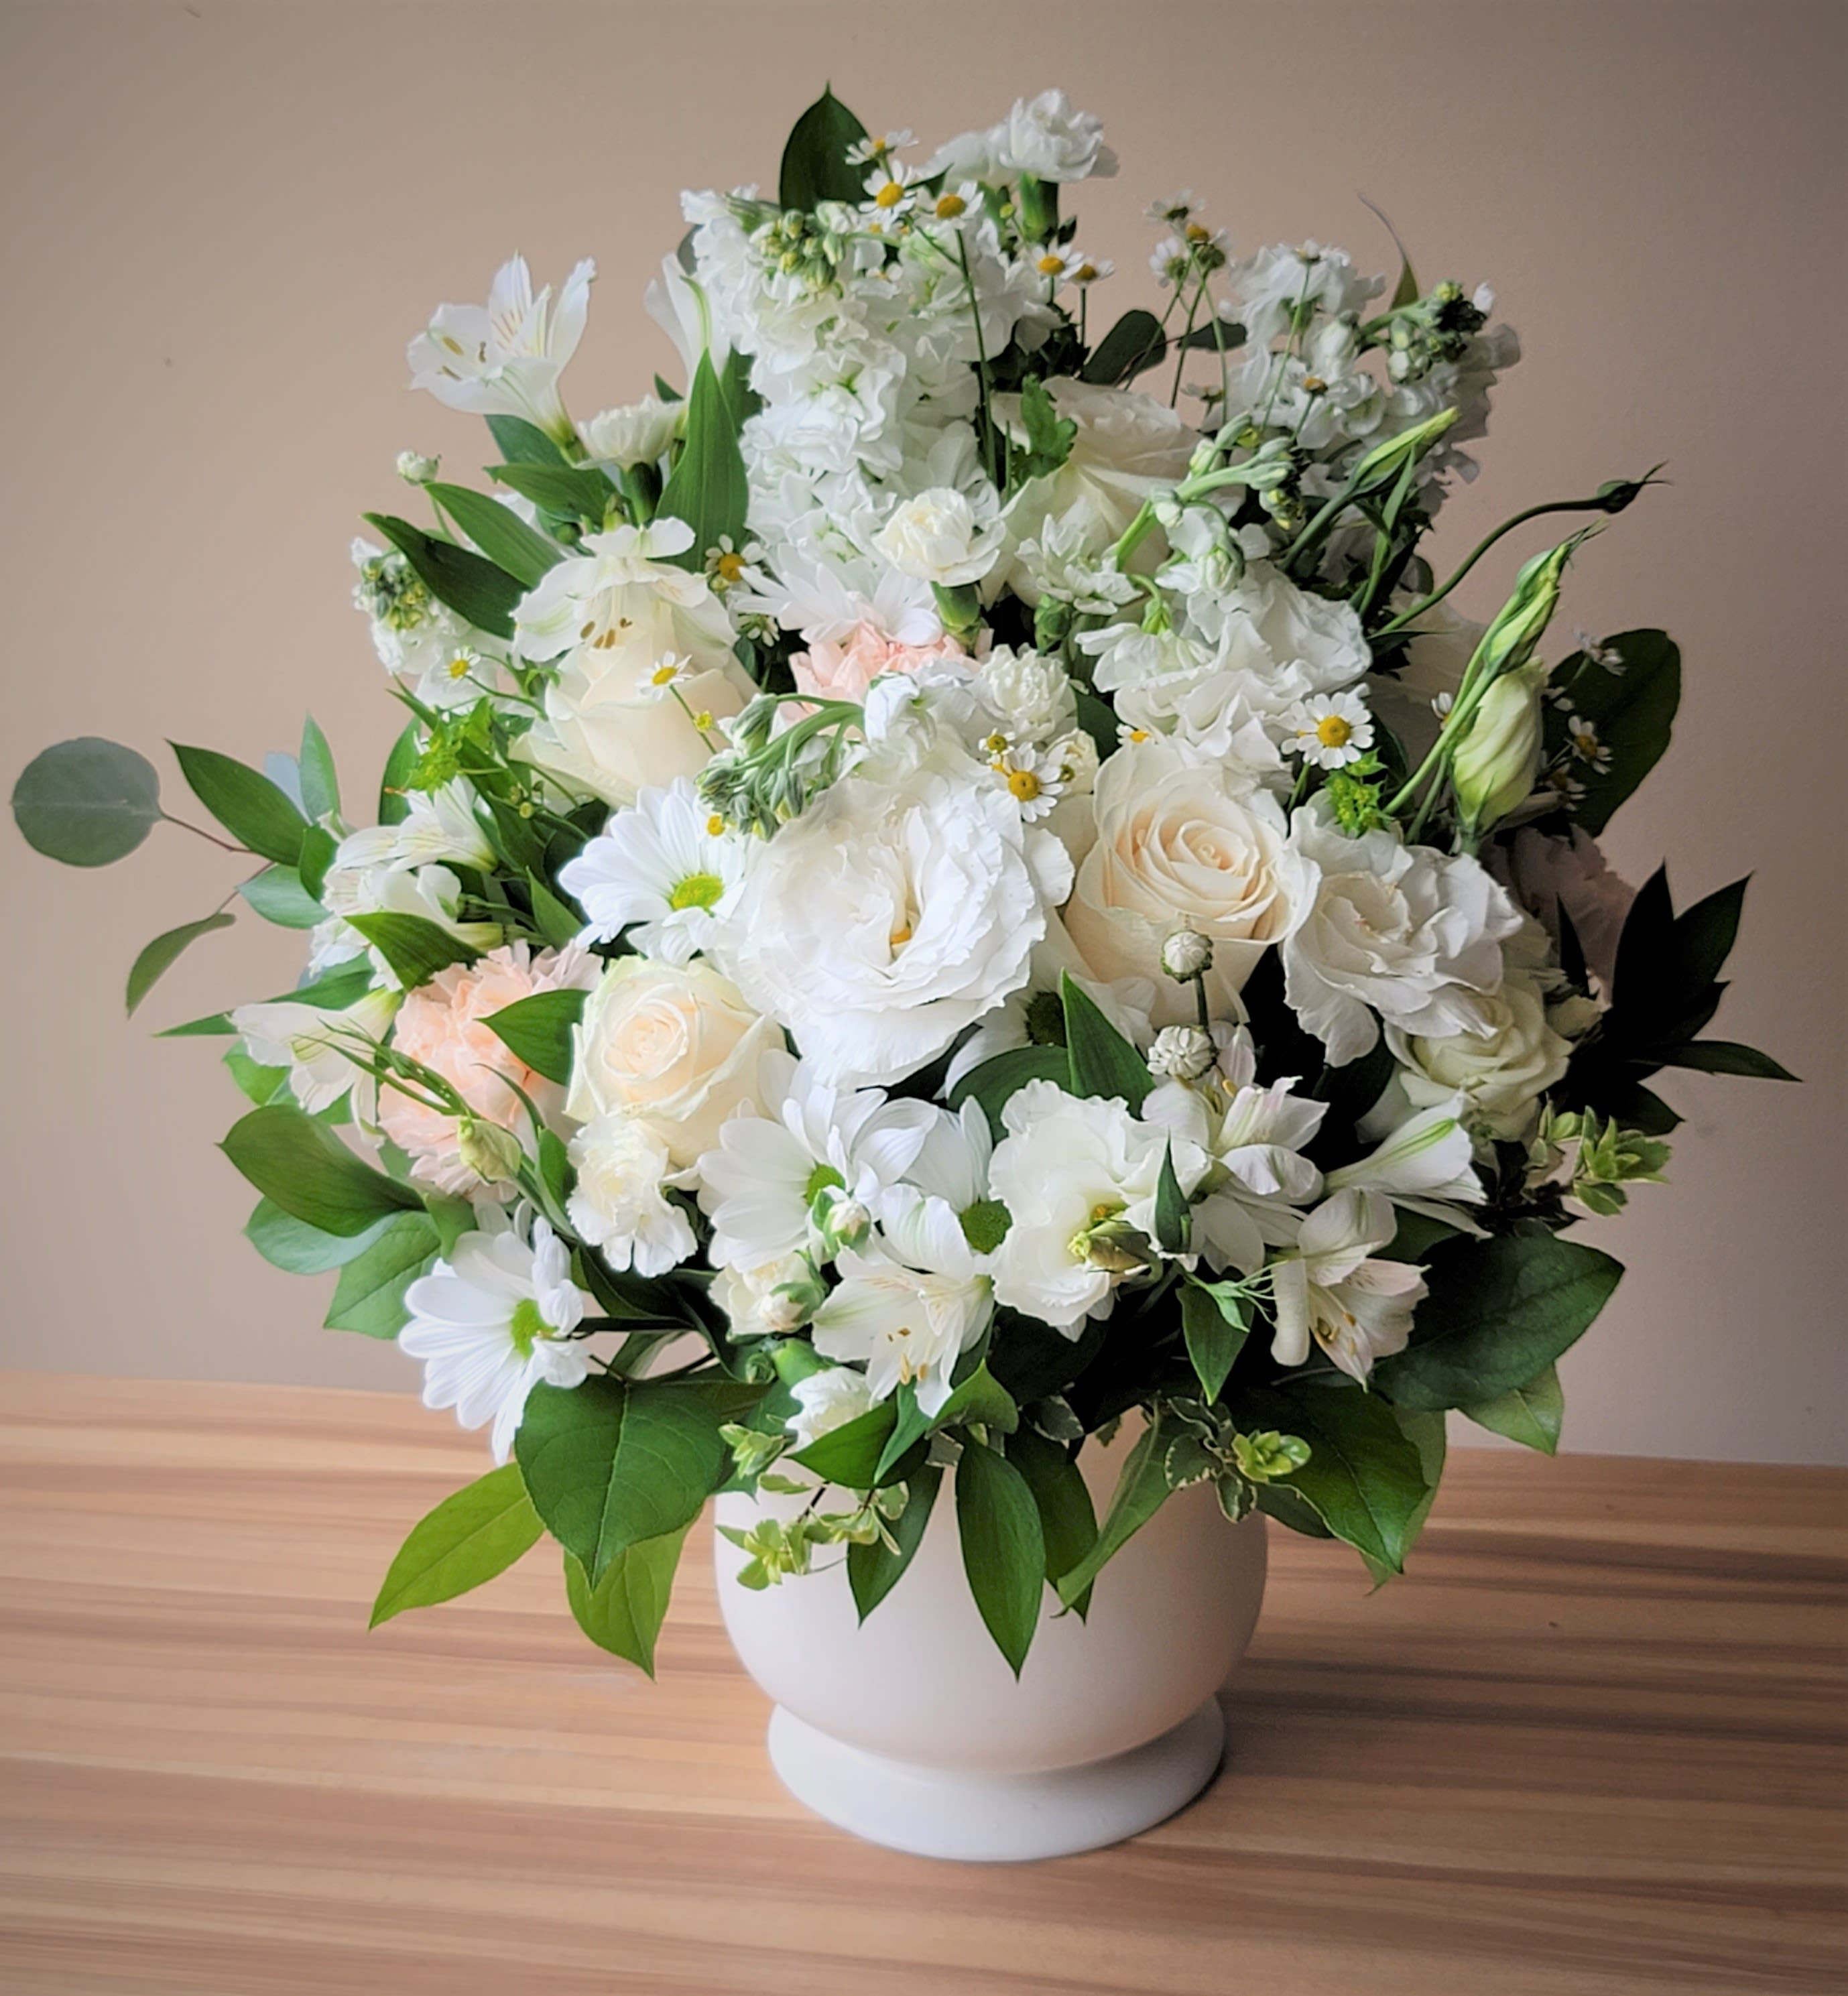 Pure Blessings Tribute - Pure Blessings Tribute bouquet is the perfect way to show your support by sending a classic arrangement of white bloom, lush greens, and seasonal accents.  This delicate arrangement comes crafted with an elegant mix of lilies, roses, and hydrangeas to send messages of comfort with charm and grace.  Approximately 24&quot;H x 18&quot;W.  